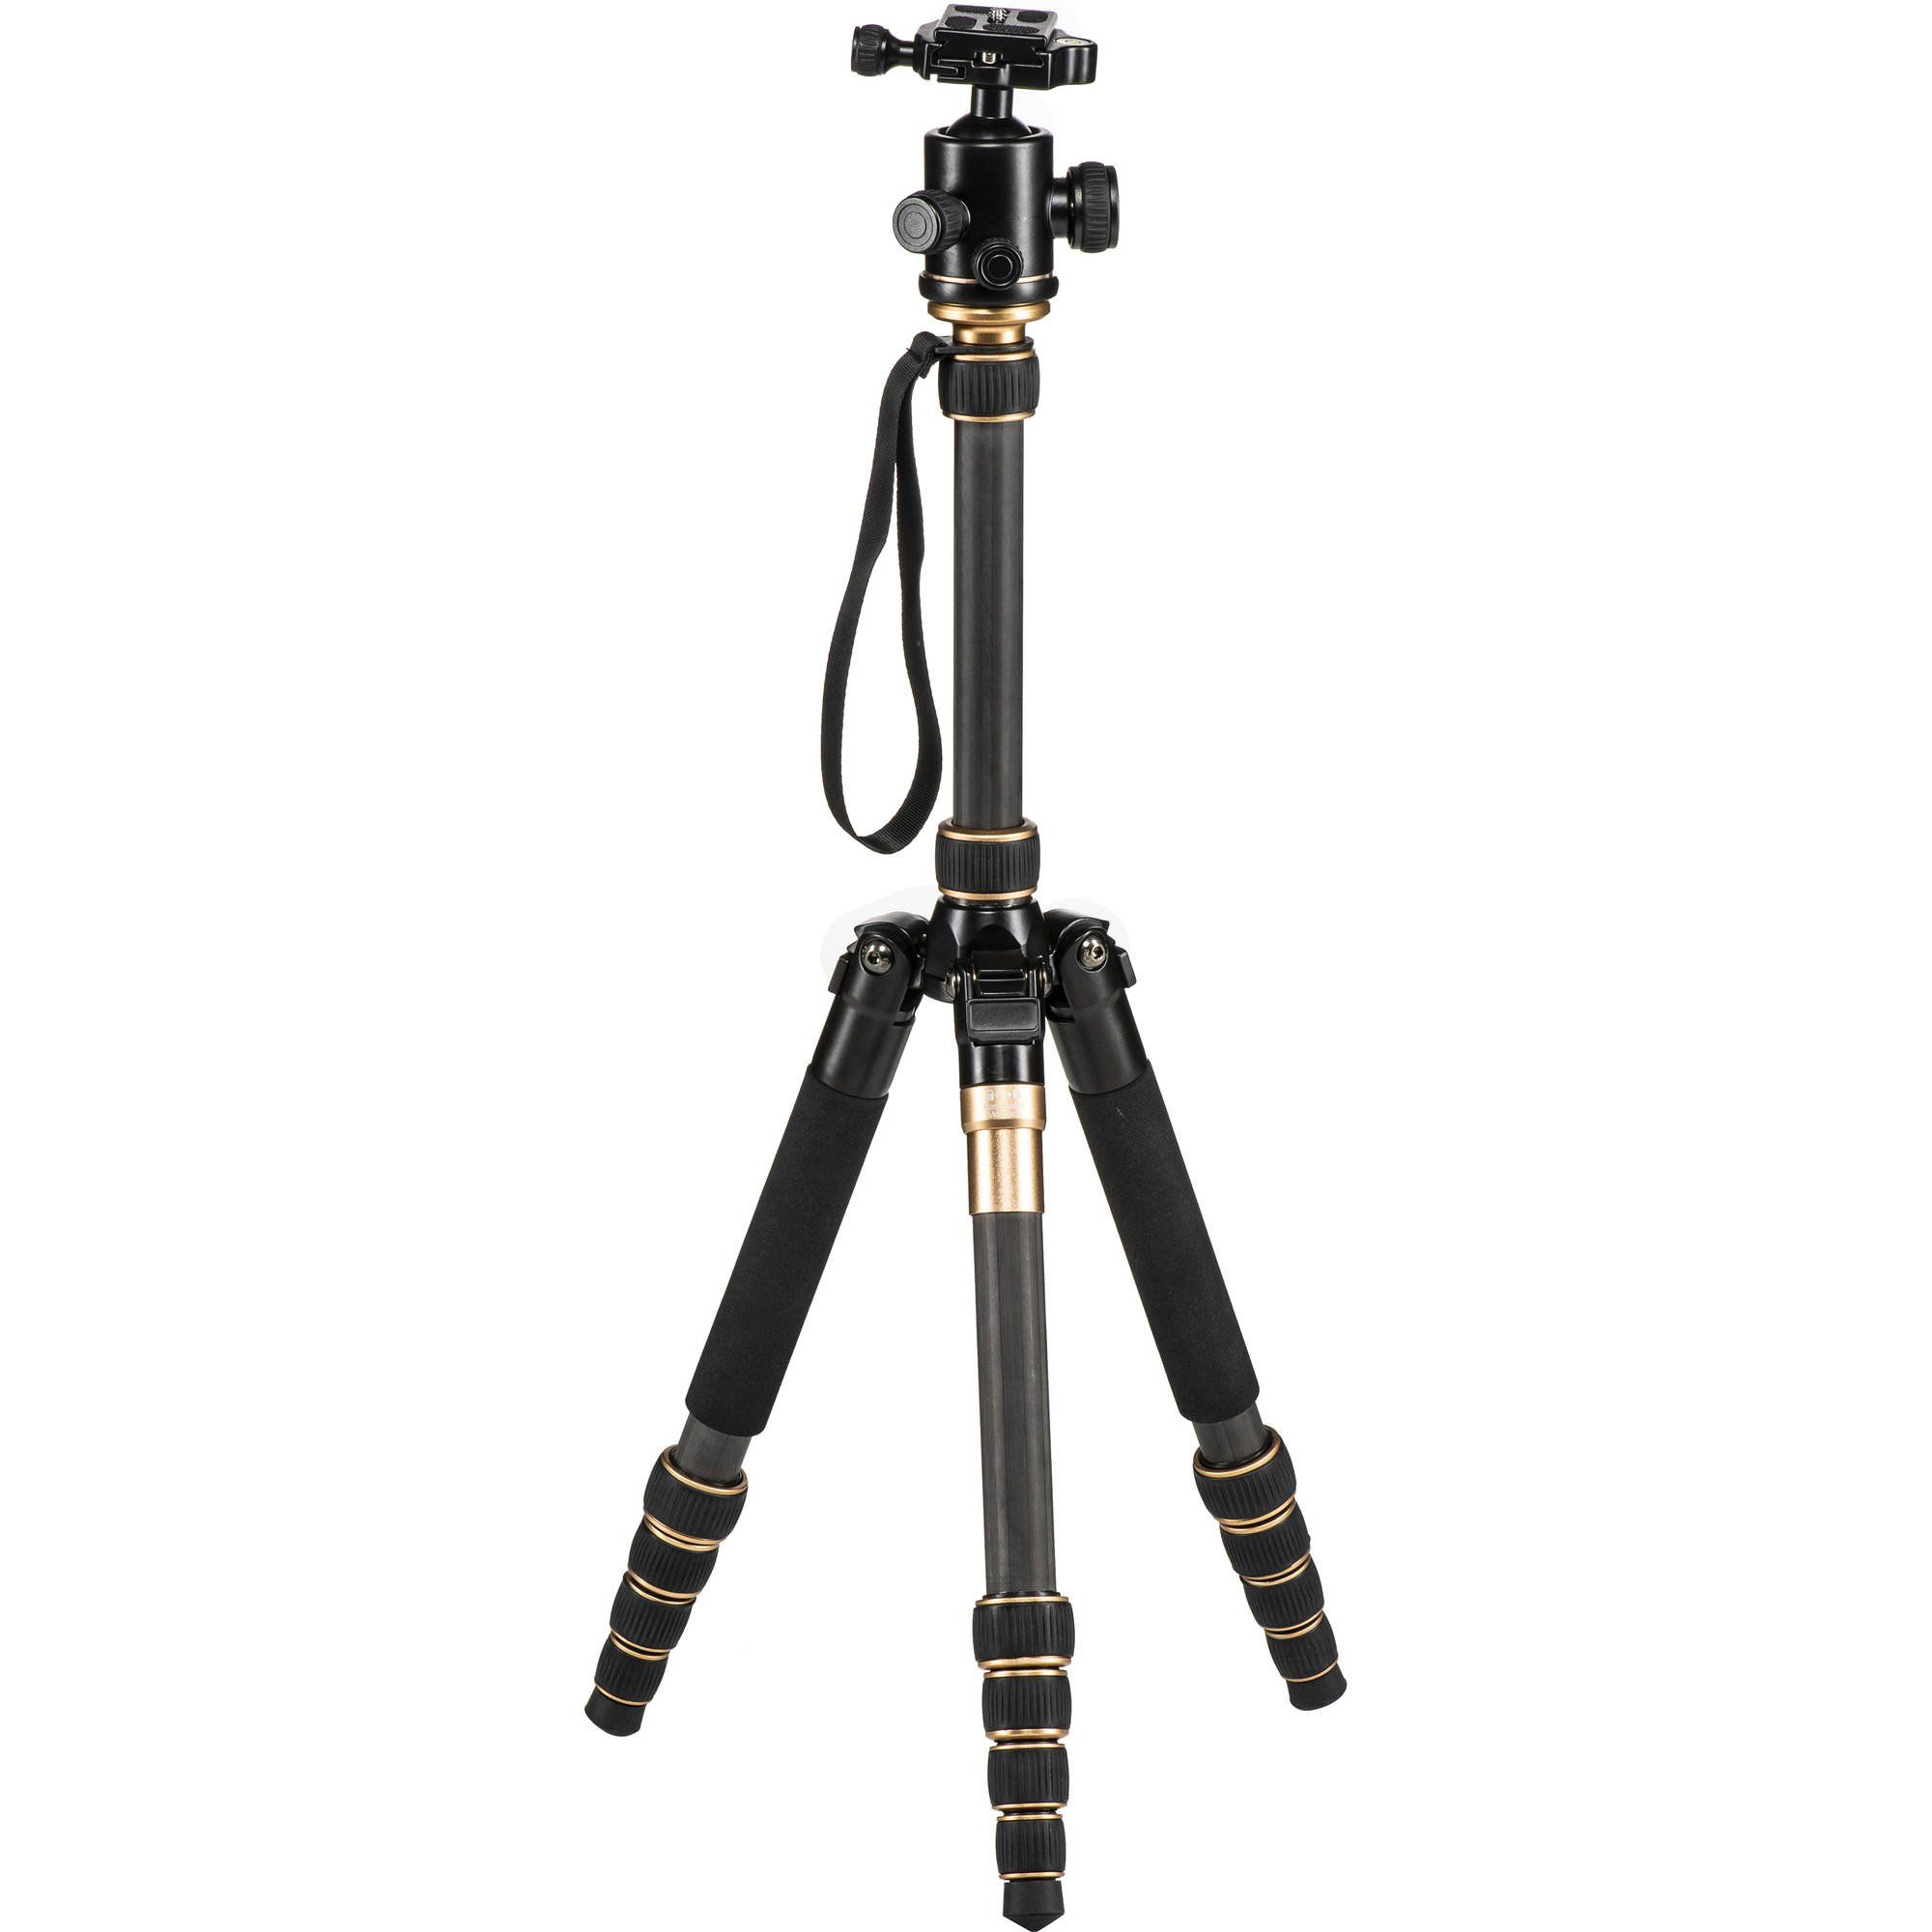 Amateur but want good value ball head and tripod